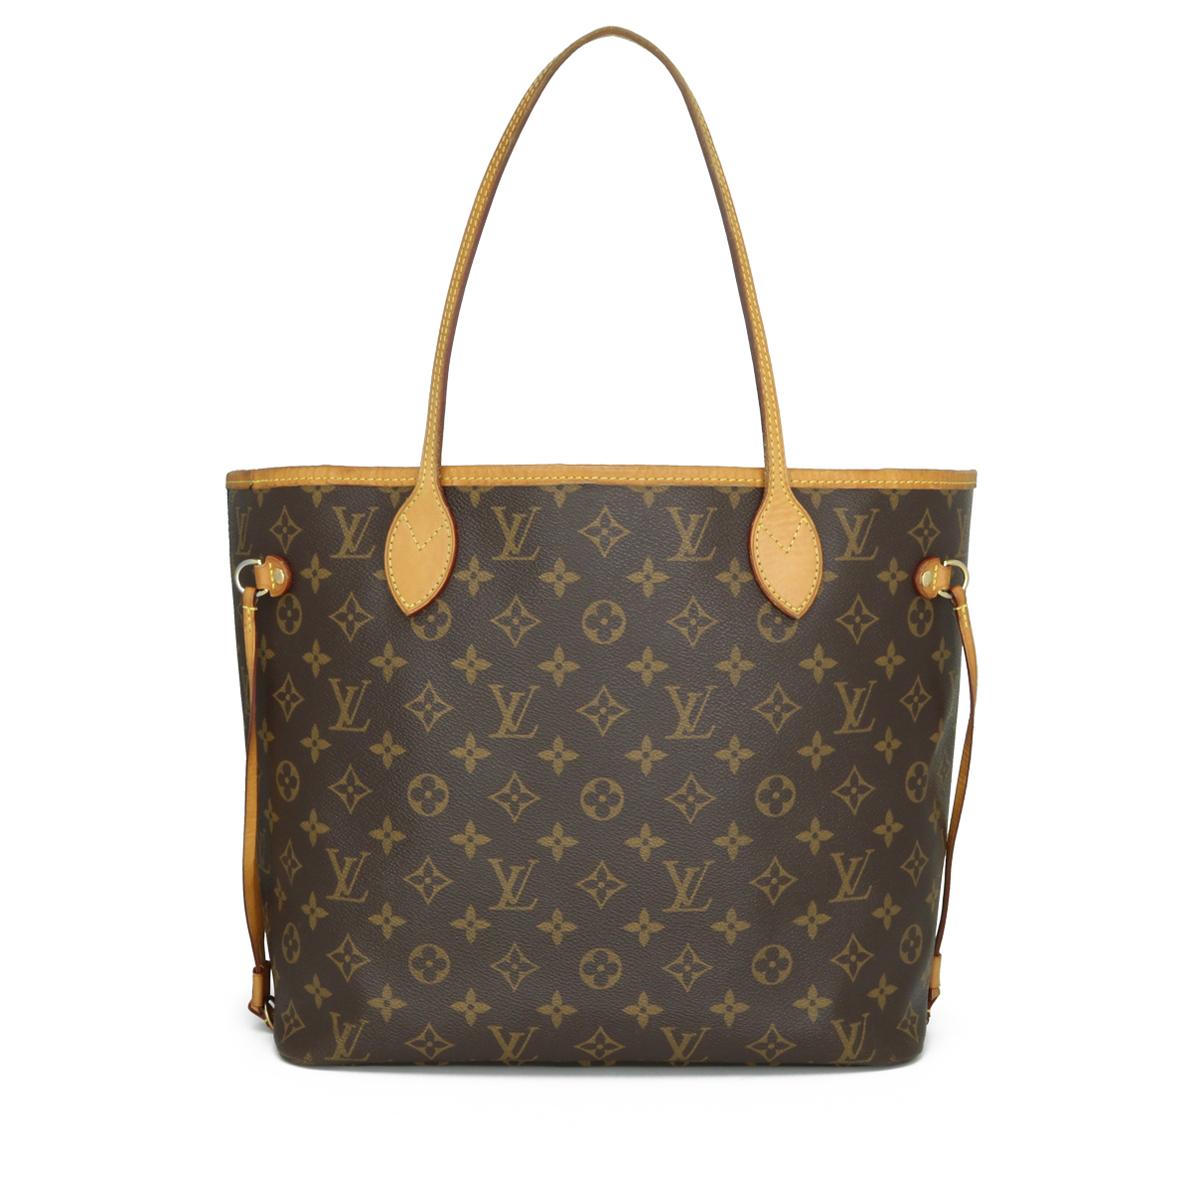 Louis Vuitton Neverfull MM in Monogram with Beige Interior 2017.

This bag is in good condition. 

- Exterior Condition: Good condition. Light storage creases to the canvas. Rubbing to four base corners. General marking and leather wear around the